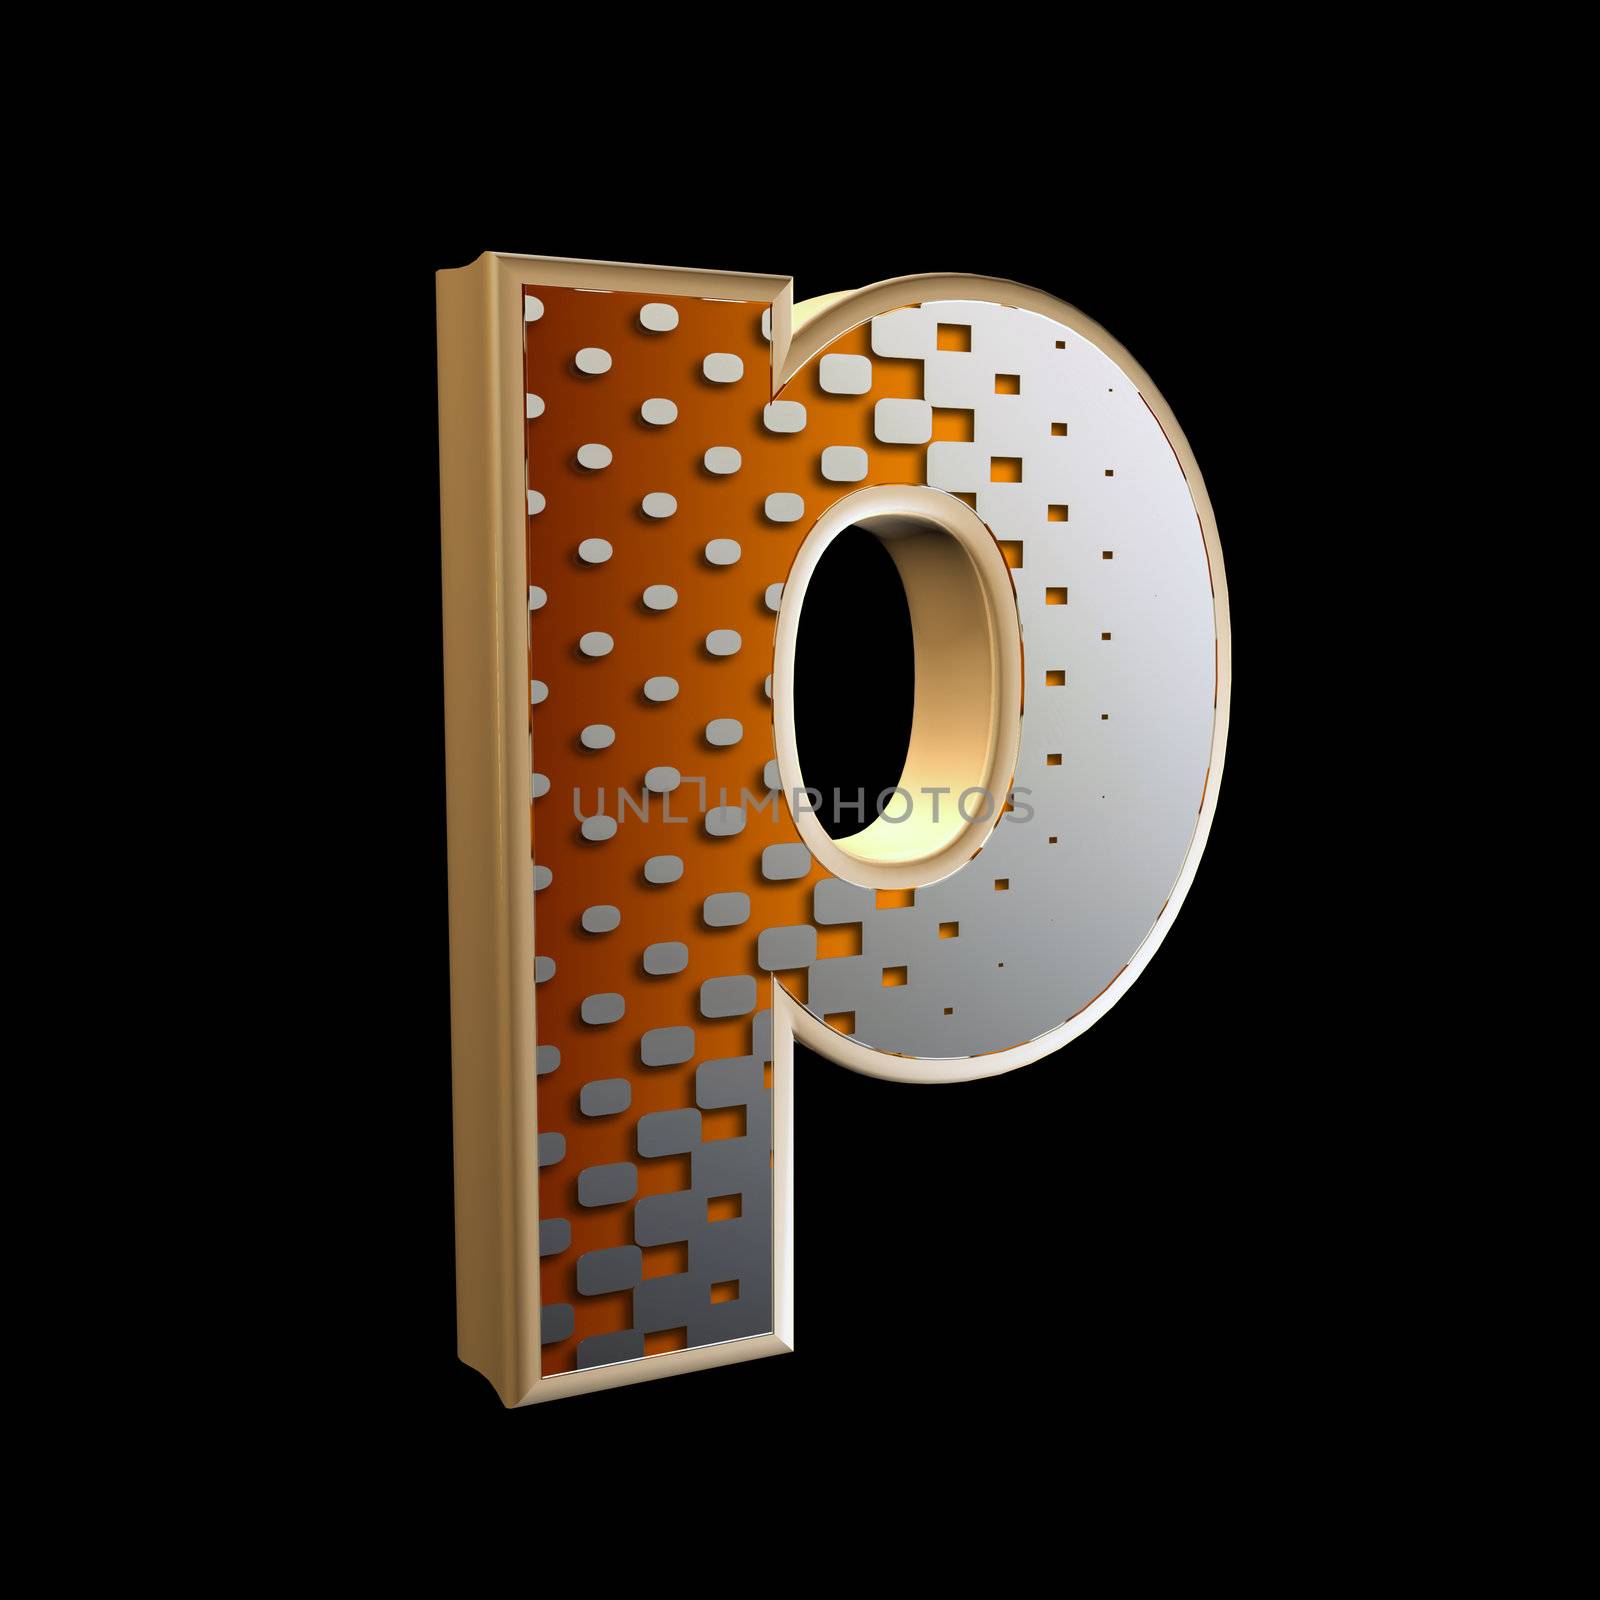 abstract 3d letter with halftone texture - p by chrisroll